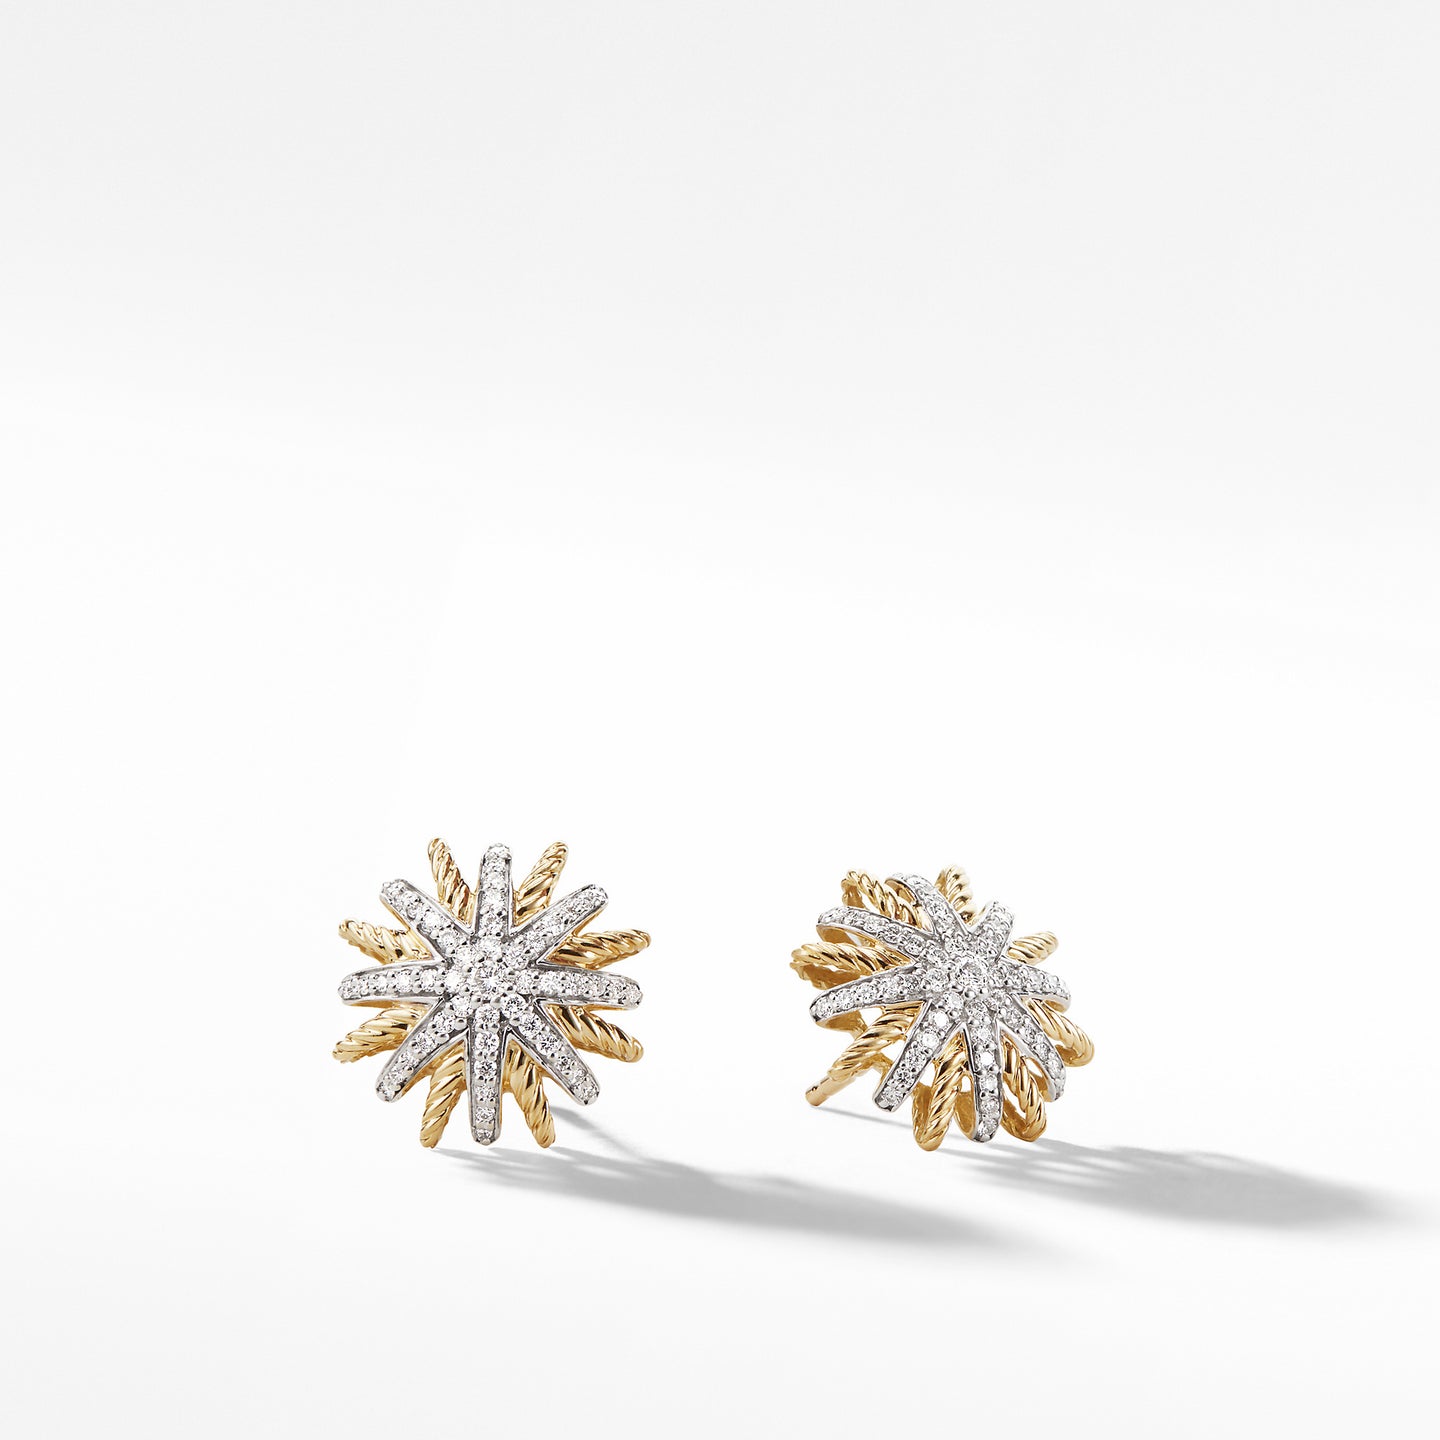 Starburst Earrings with Diamonds in Gold